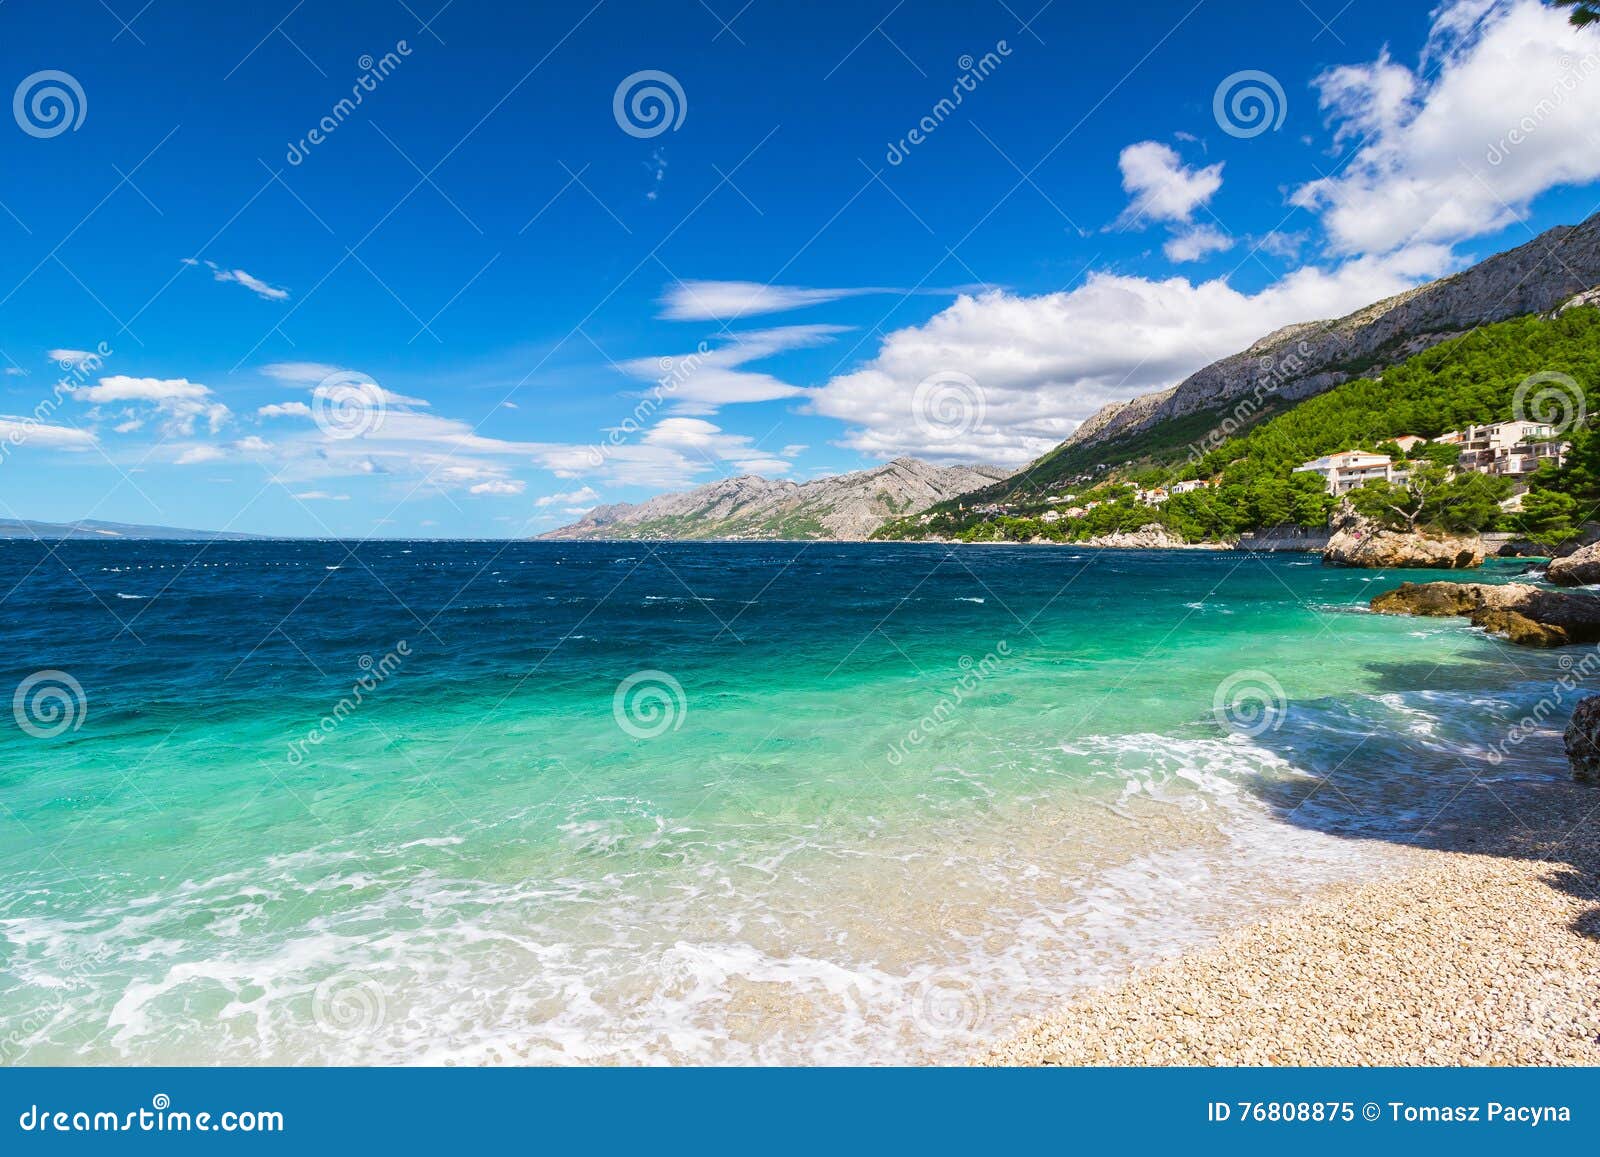 peaceful and transparent summer sea, mountainous landscape in the background